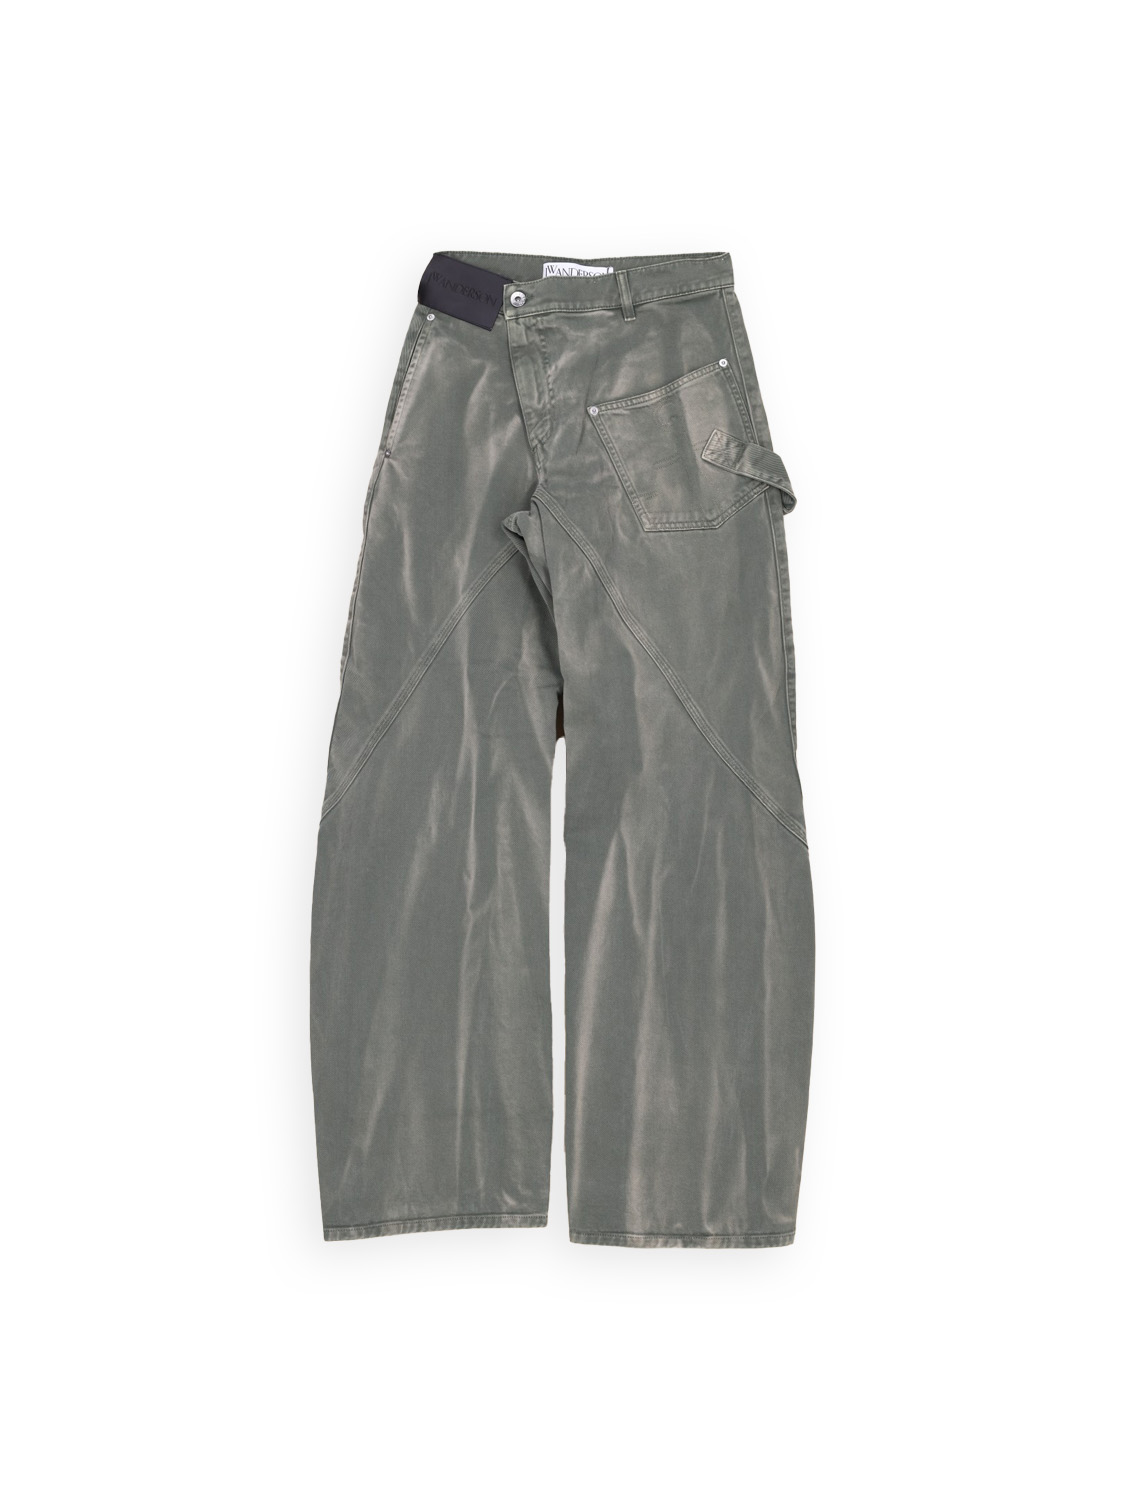 JW Anderson Colored jeans in a worker style made from robust cotton  khaki 30